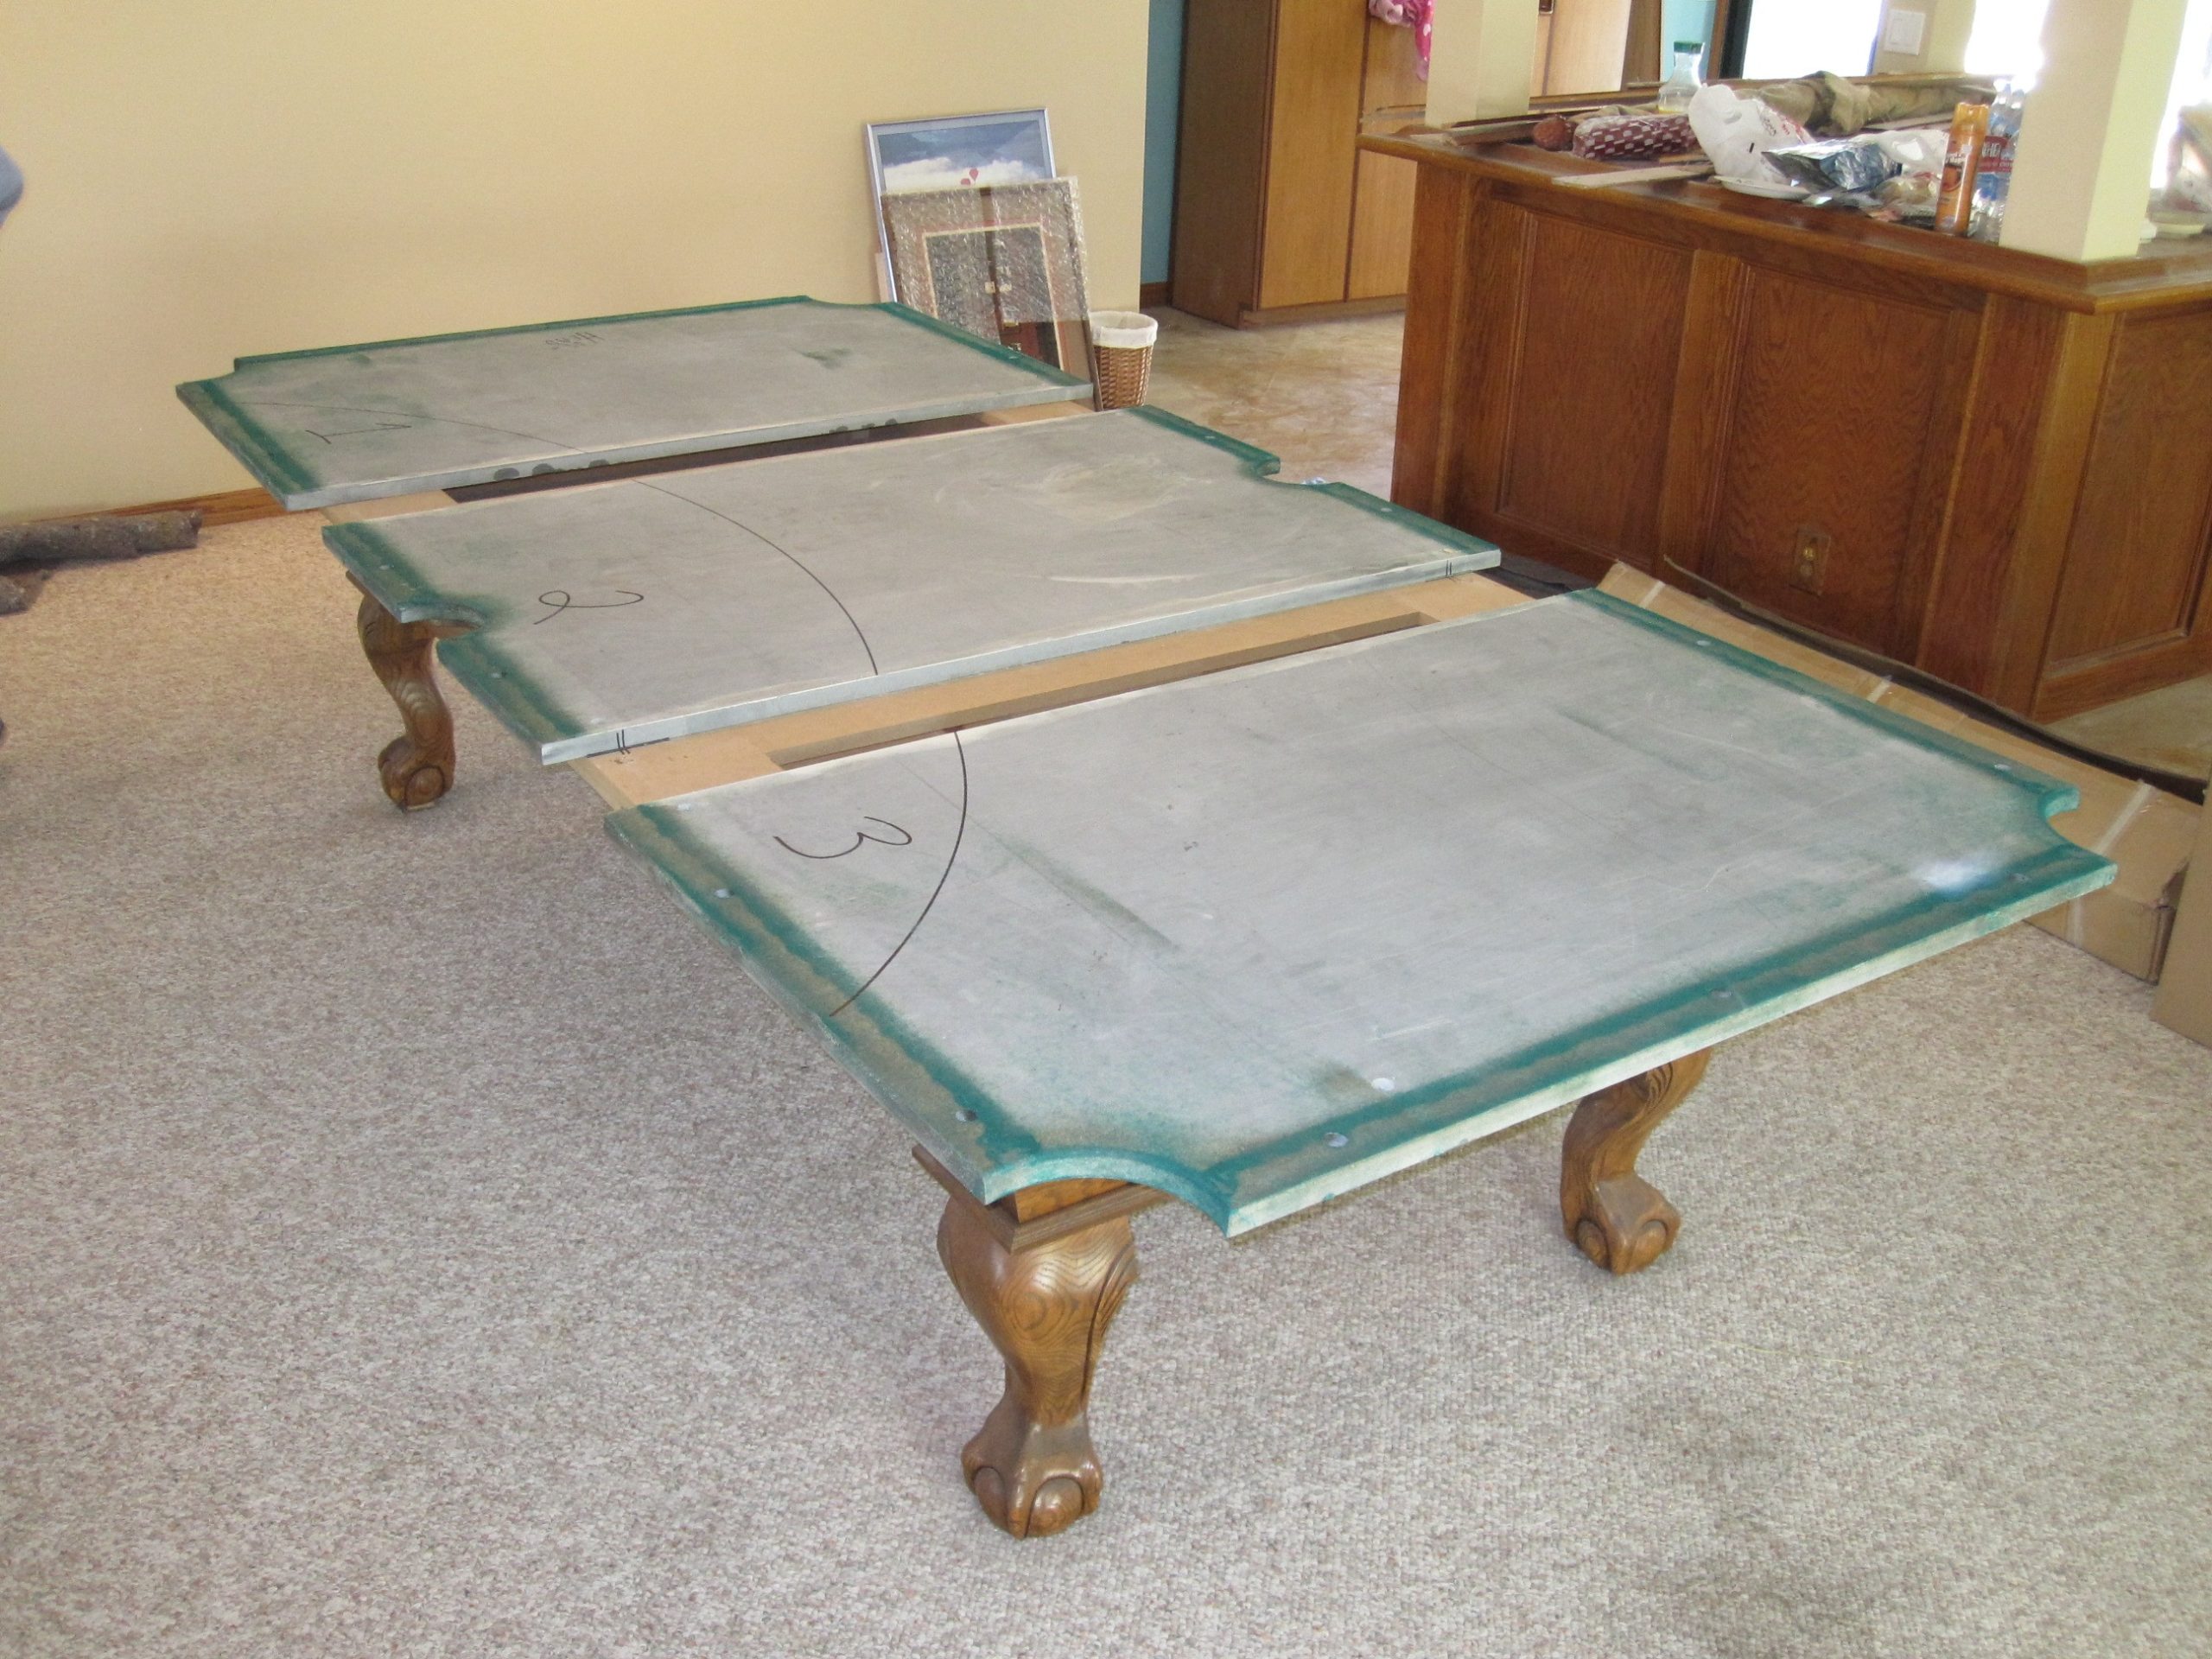 How do you prepare a pool table for slate?